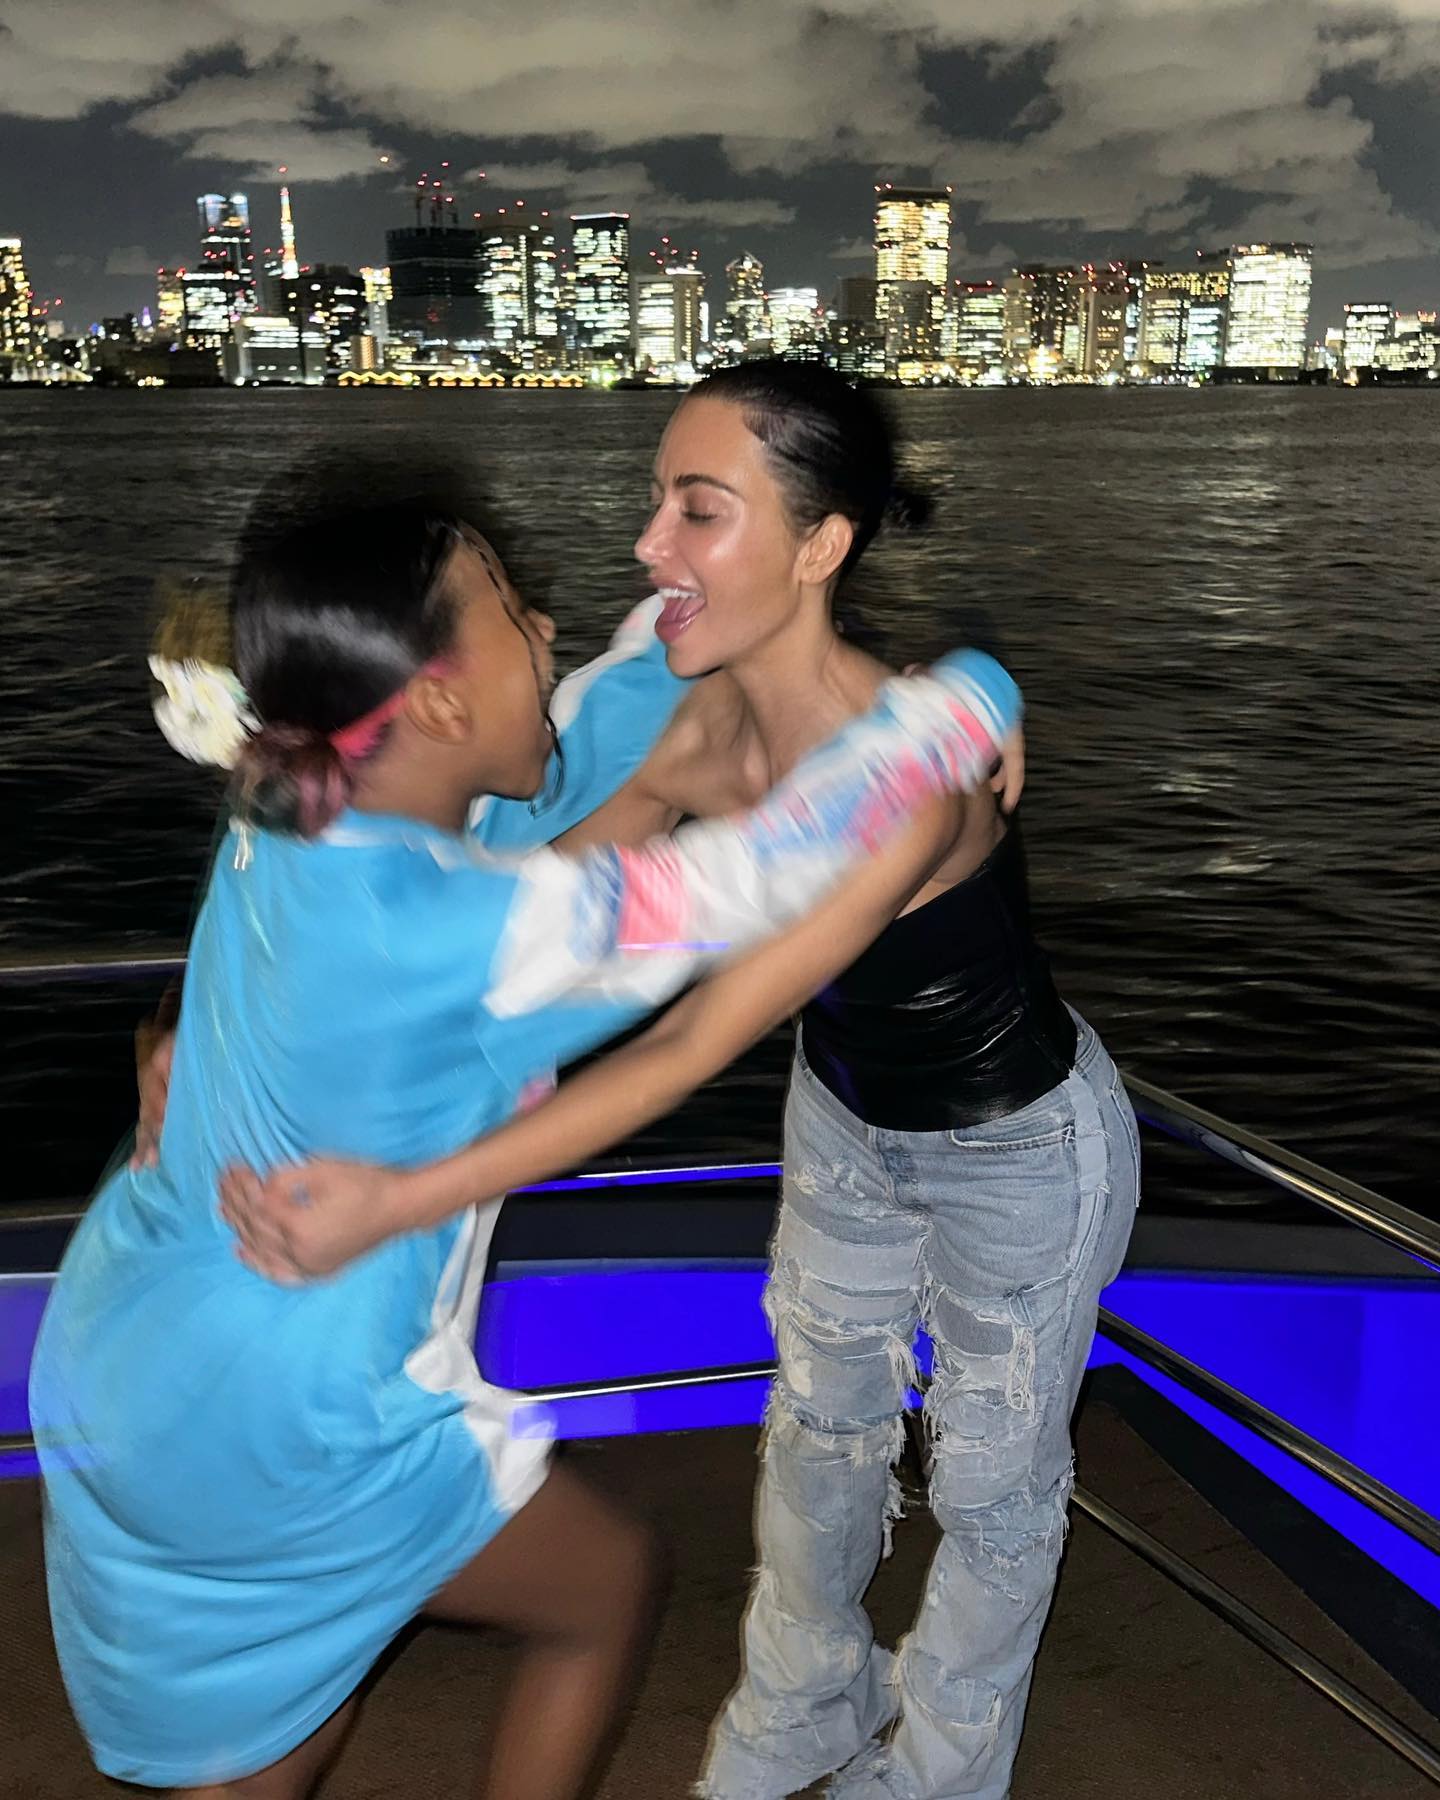 likhoa kim kardashian took north west to a heartwarming mother daughter yacht dinner for her th birthday 6542175f6fd9f Kim Kardashian Took North West to a Heartwarming Mother-Daughter Yacht Dinner for Her 11th Birthday